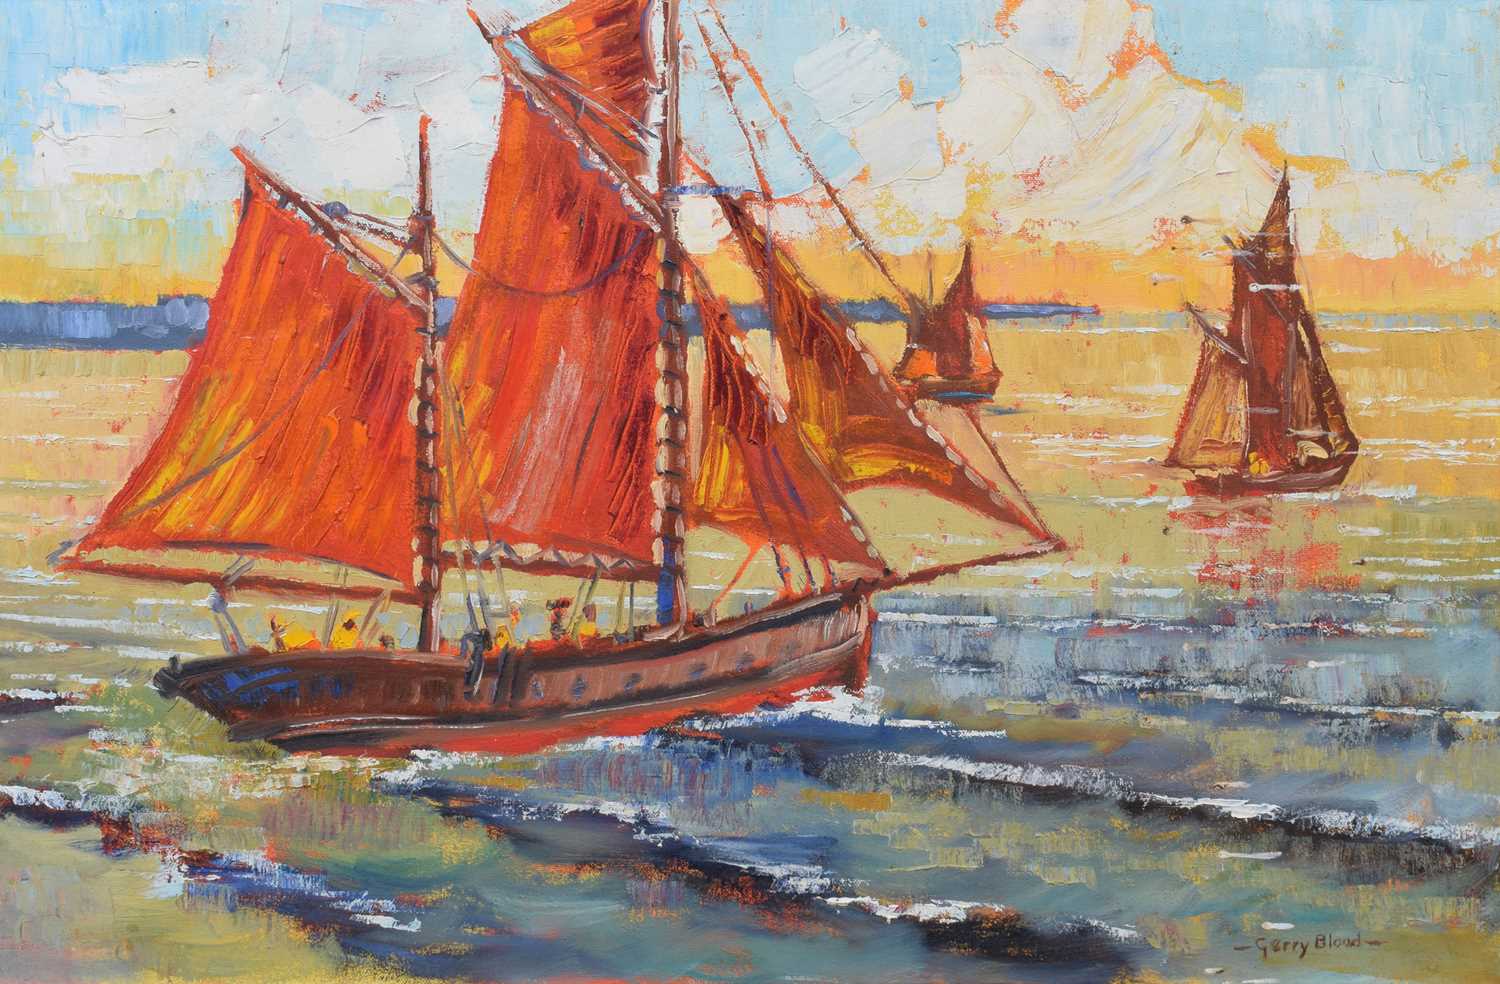 Lot 68 - Gerry Blood, Coastal view with sailing boats, oil on canvas.